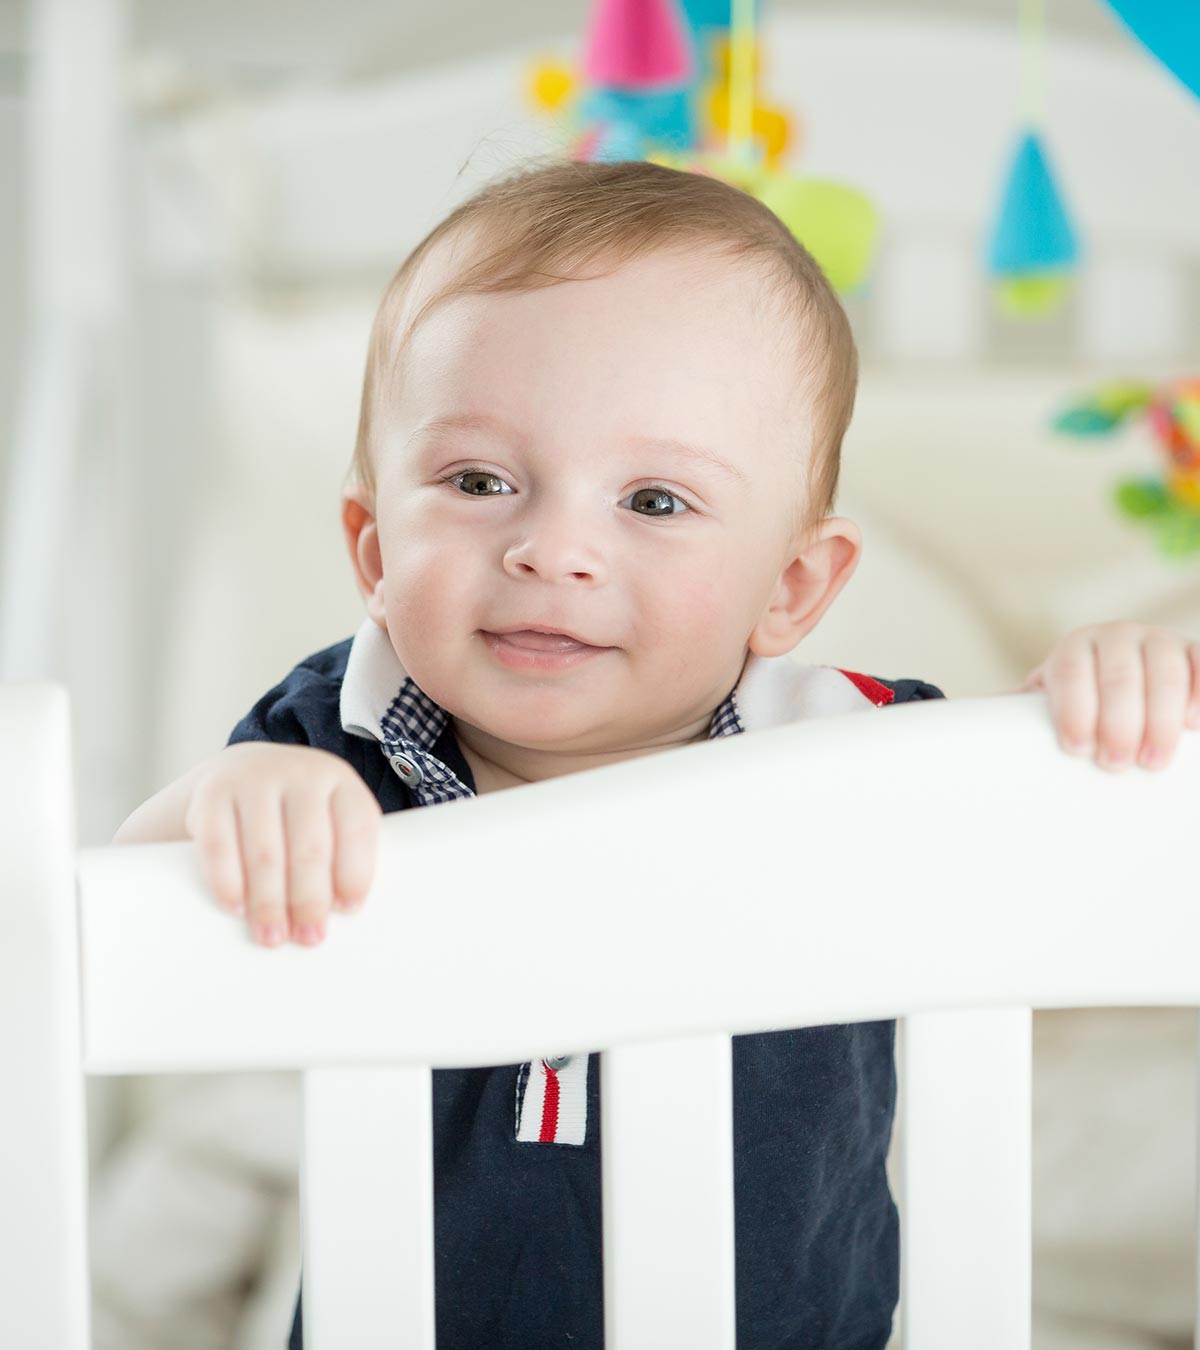 A Guide To 9-Month-Old Baby Developmental Milestones, With Tips